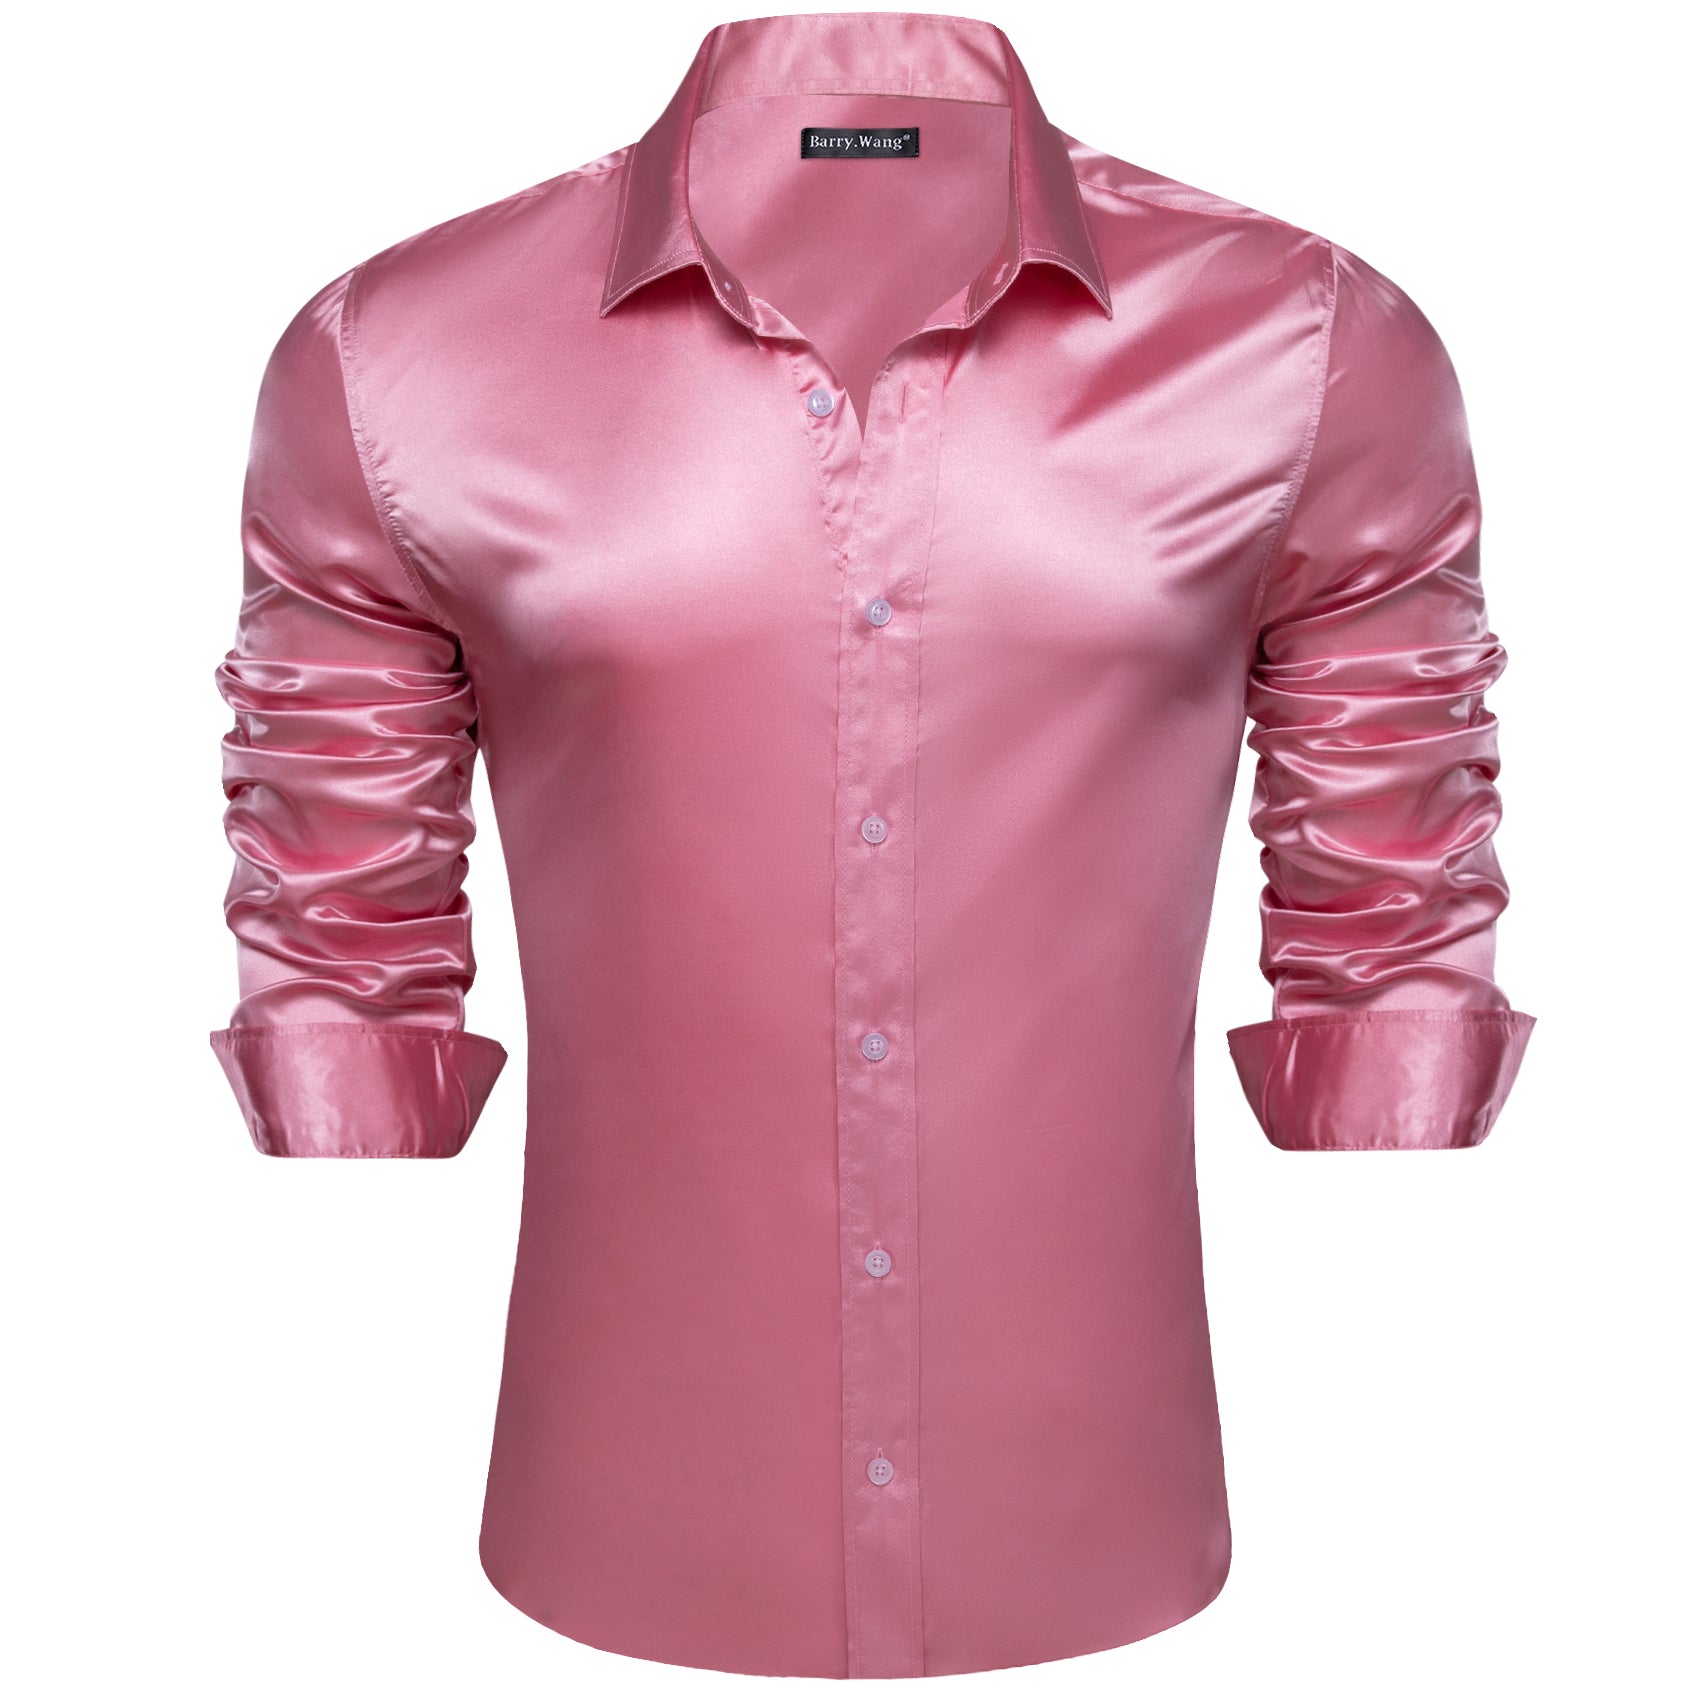 Barry.wang Pale Violet Red Solid Silk Shirt